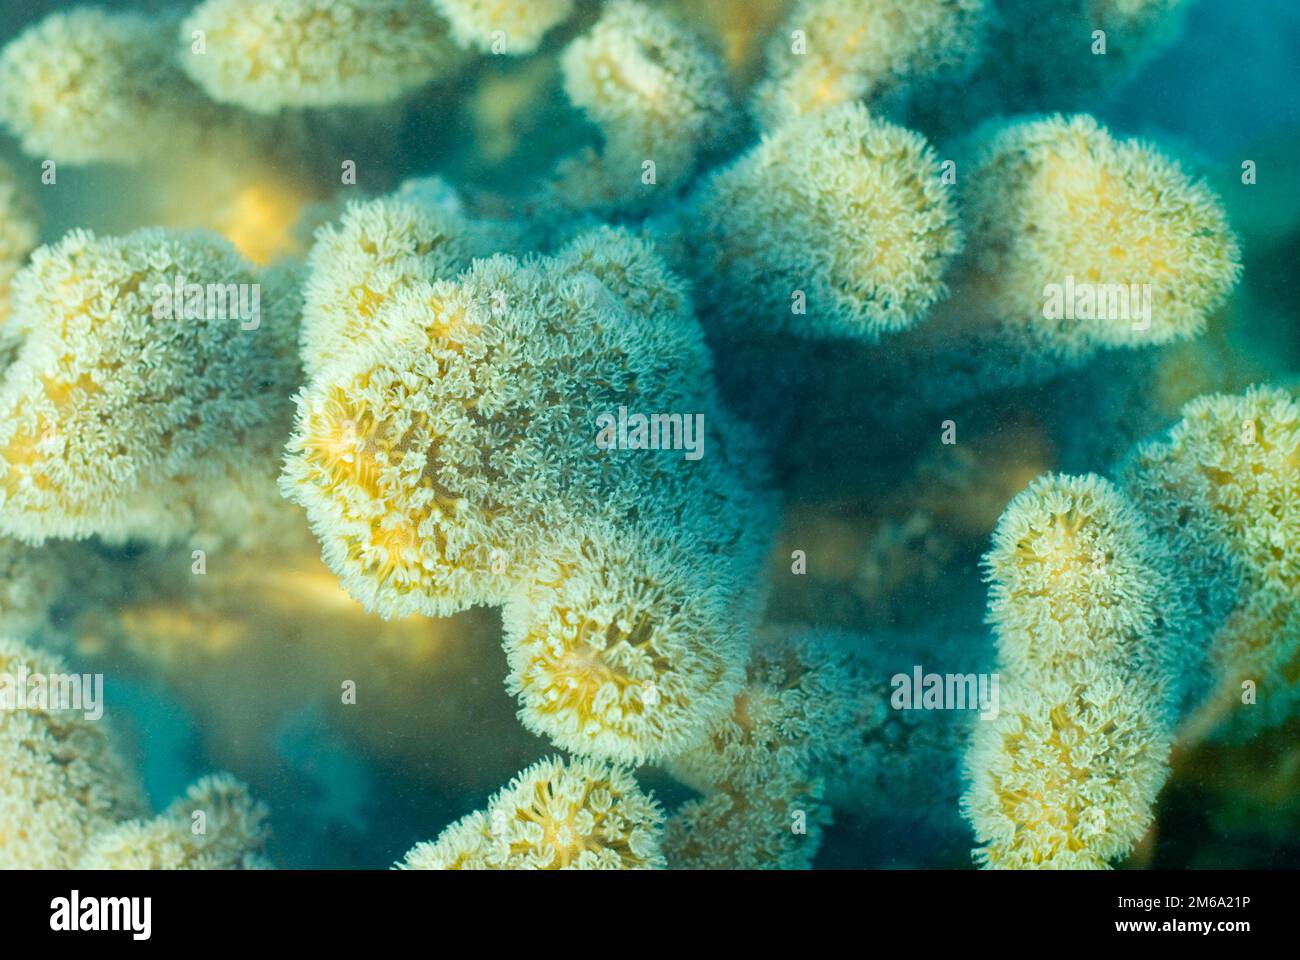 Leather coral polyps Stock Photo